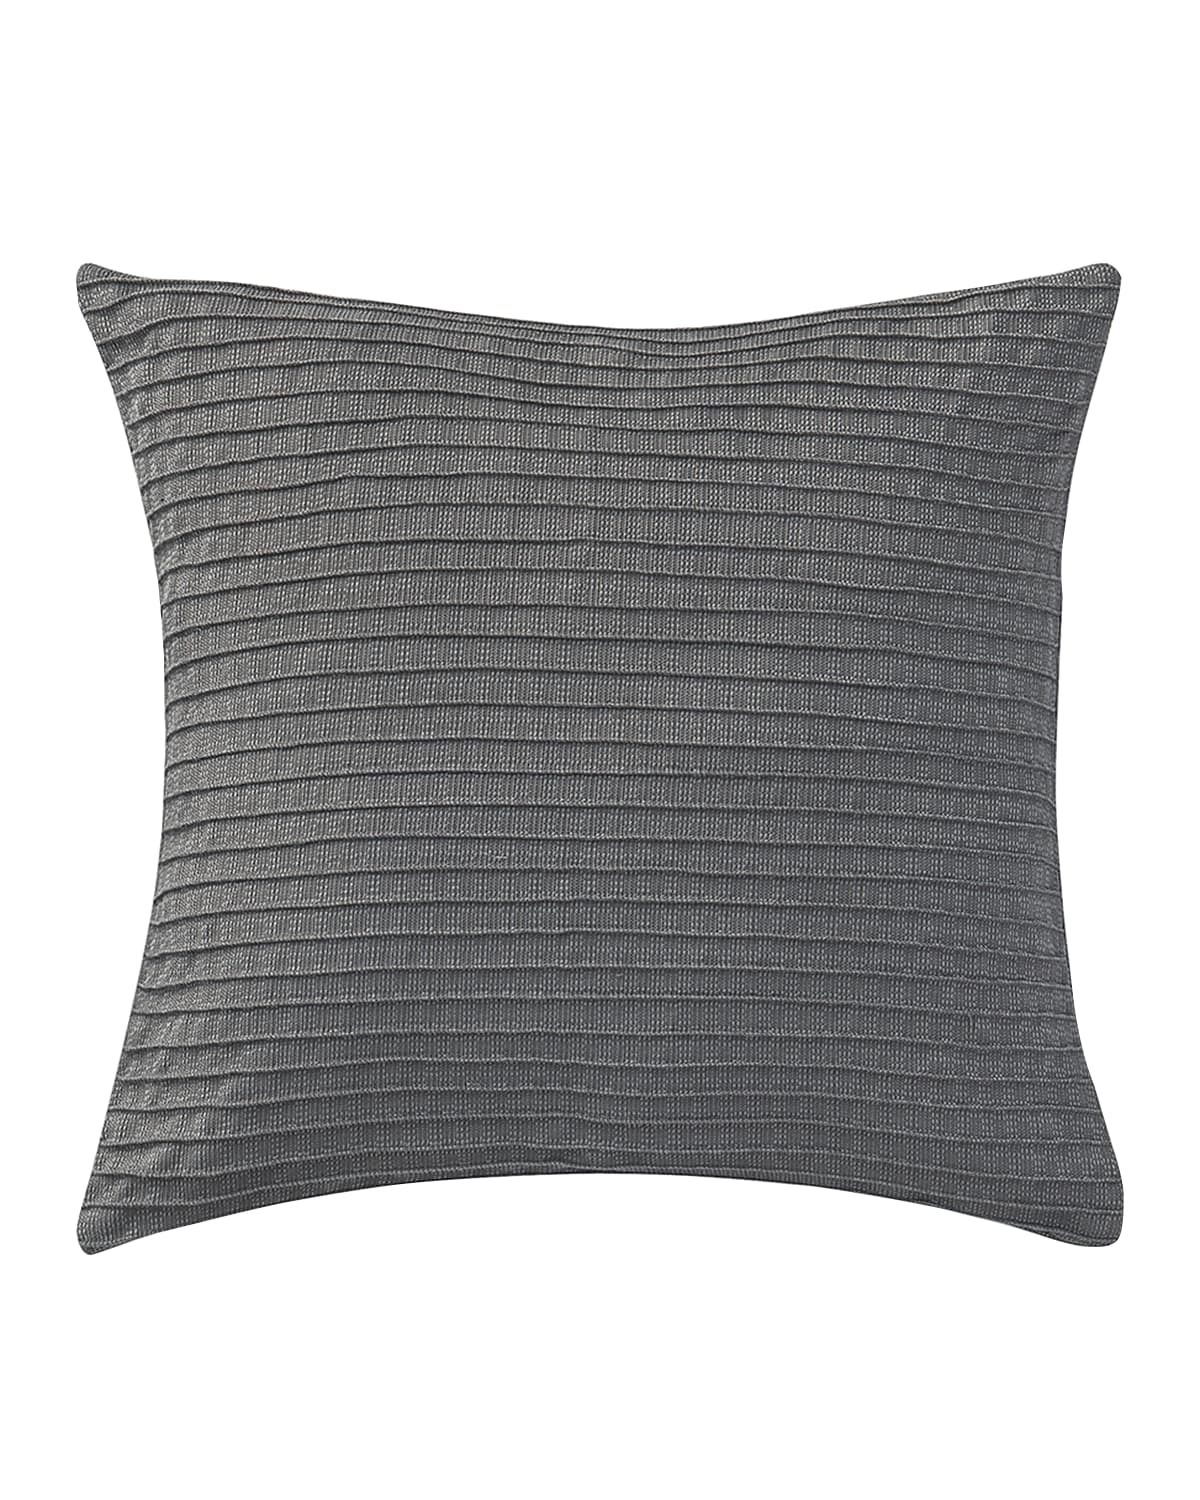 Image Waterford Pintucked Blossom Pewter Pillow, 16"Sq.